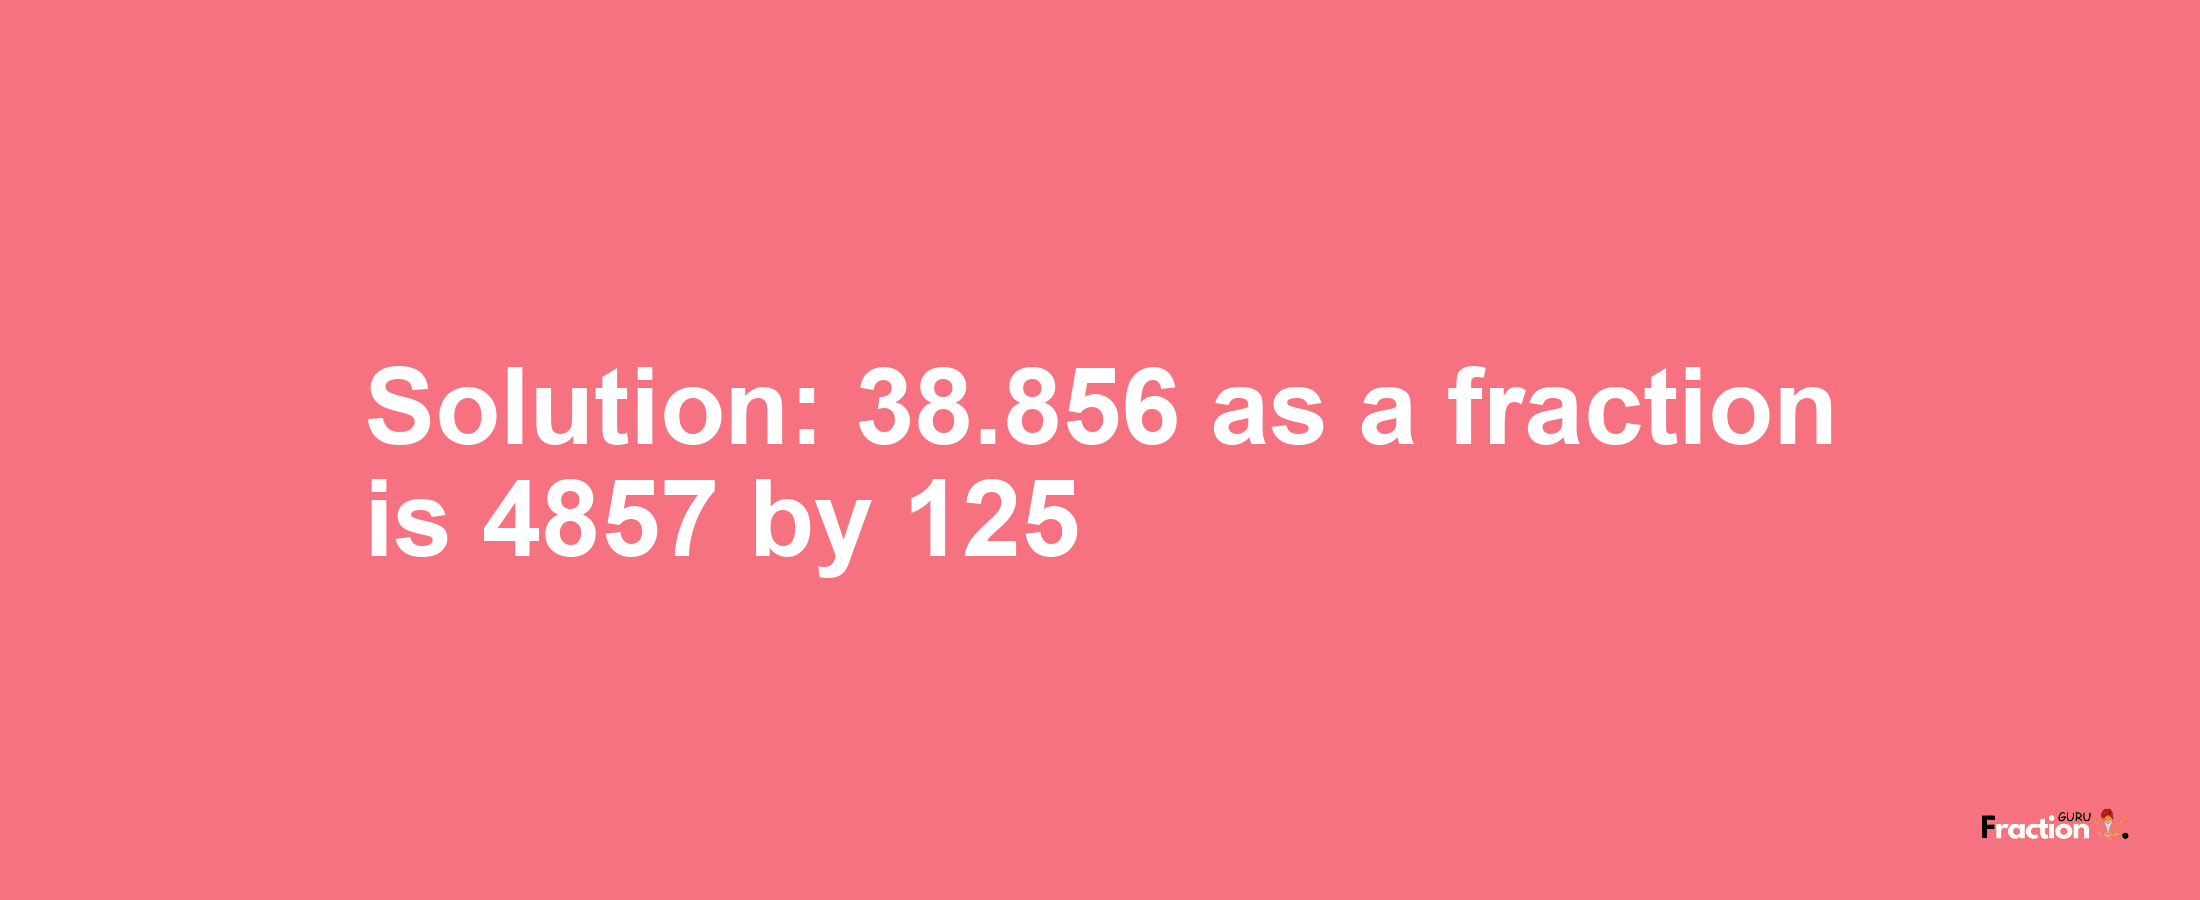 Solution:38.856 as a fraction is 4857/125